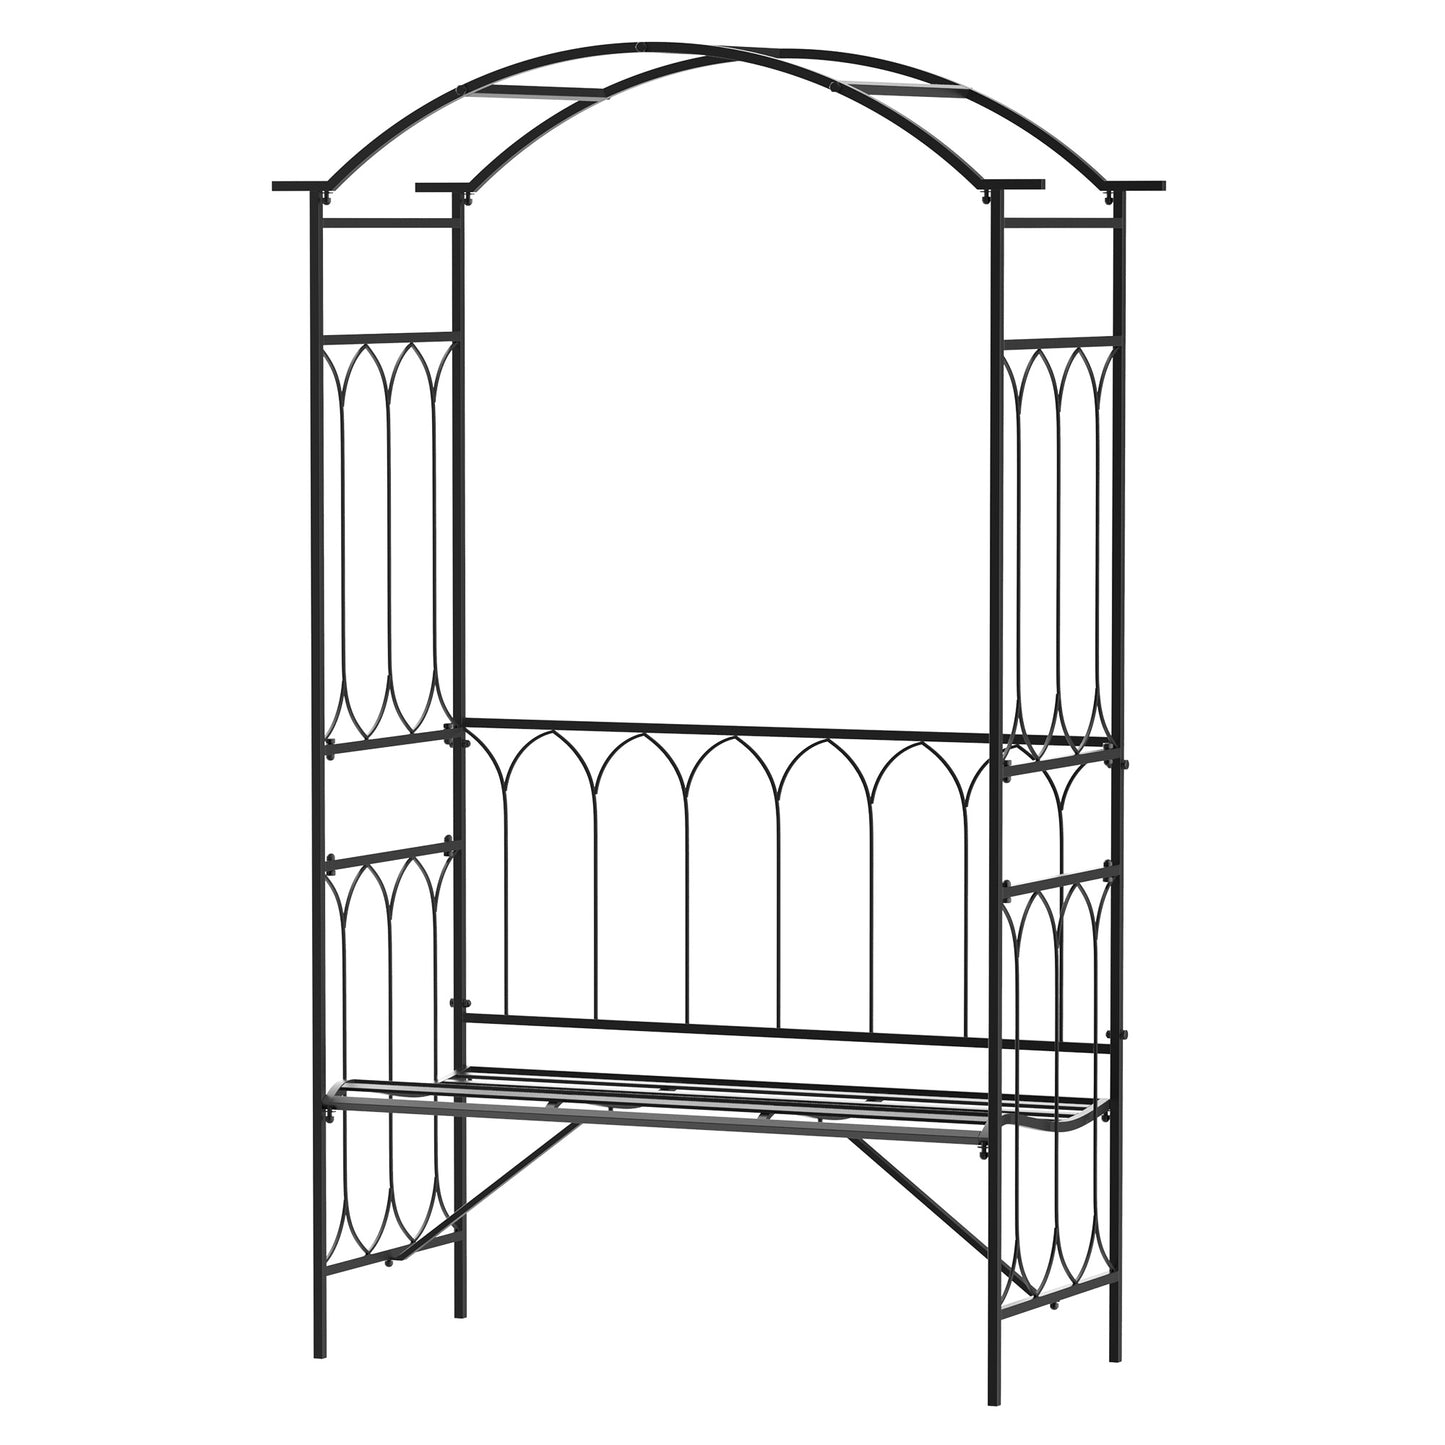 80" Tall Fairy Garden Arbor Arch with Bench Metal Outdoor Plant Climbing Support Trellis with 2 Seater Bench for Rose Vines Black at Gallery Canada